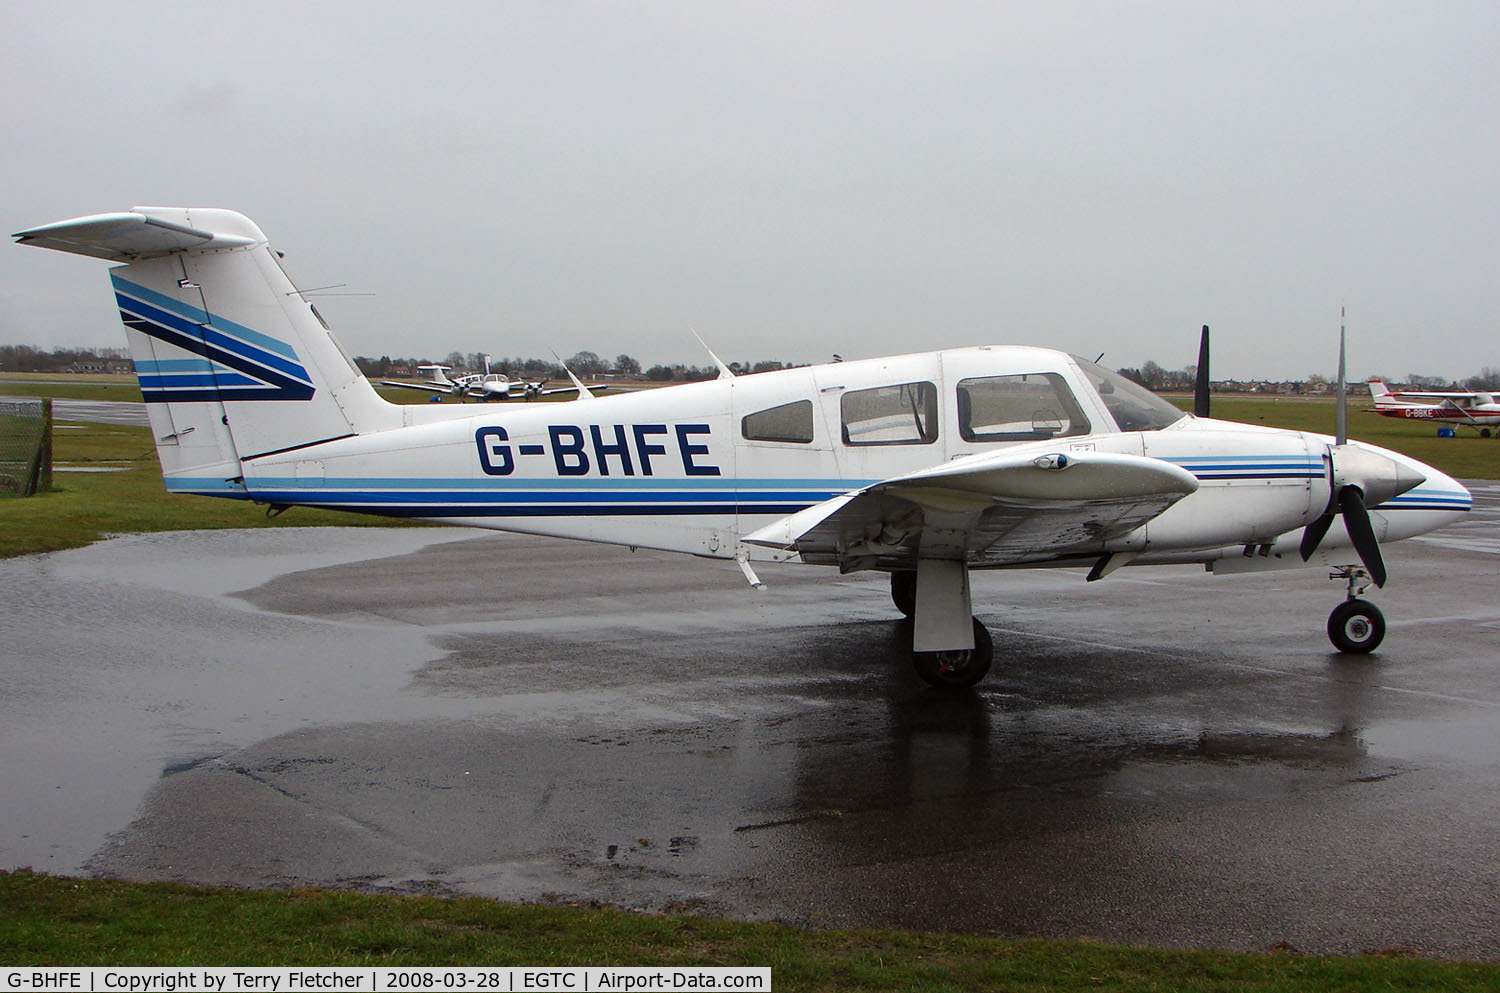 G-BHFE, 1979 Piper PA-44-180 Seminole C/N 44-7995324, Part of the General Aviation activity at Cranfield